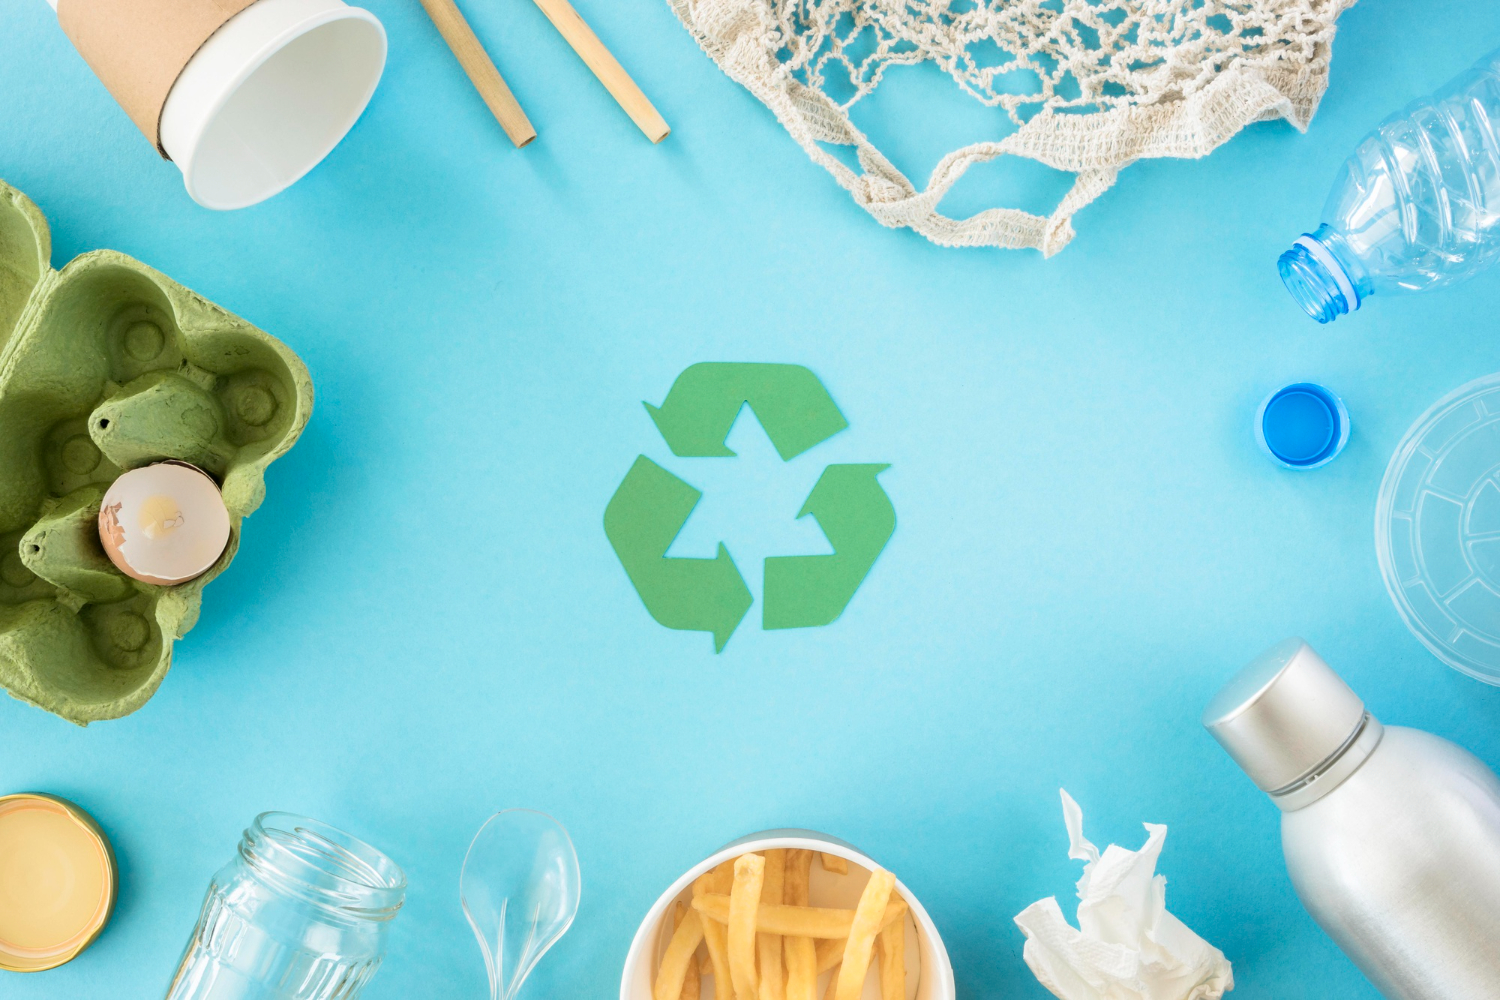 how to make our home waste-free